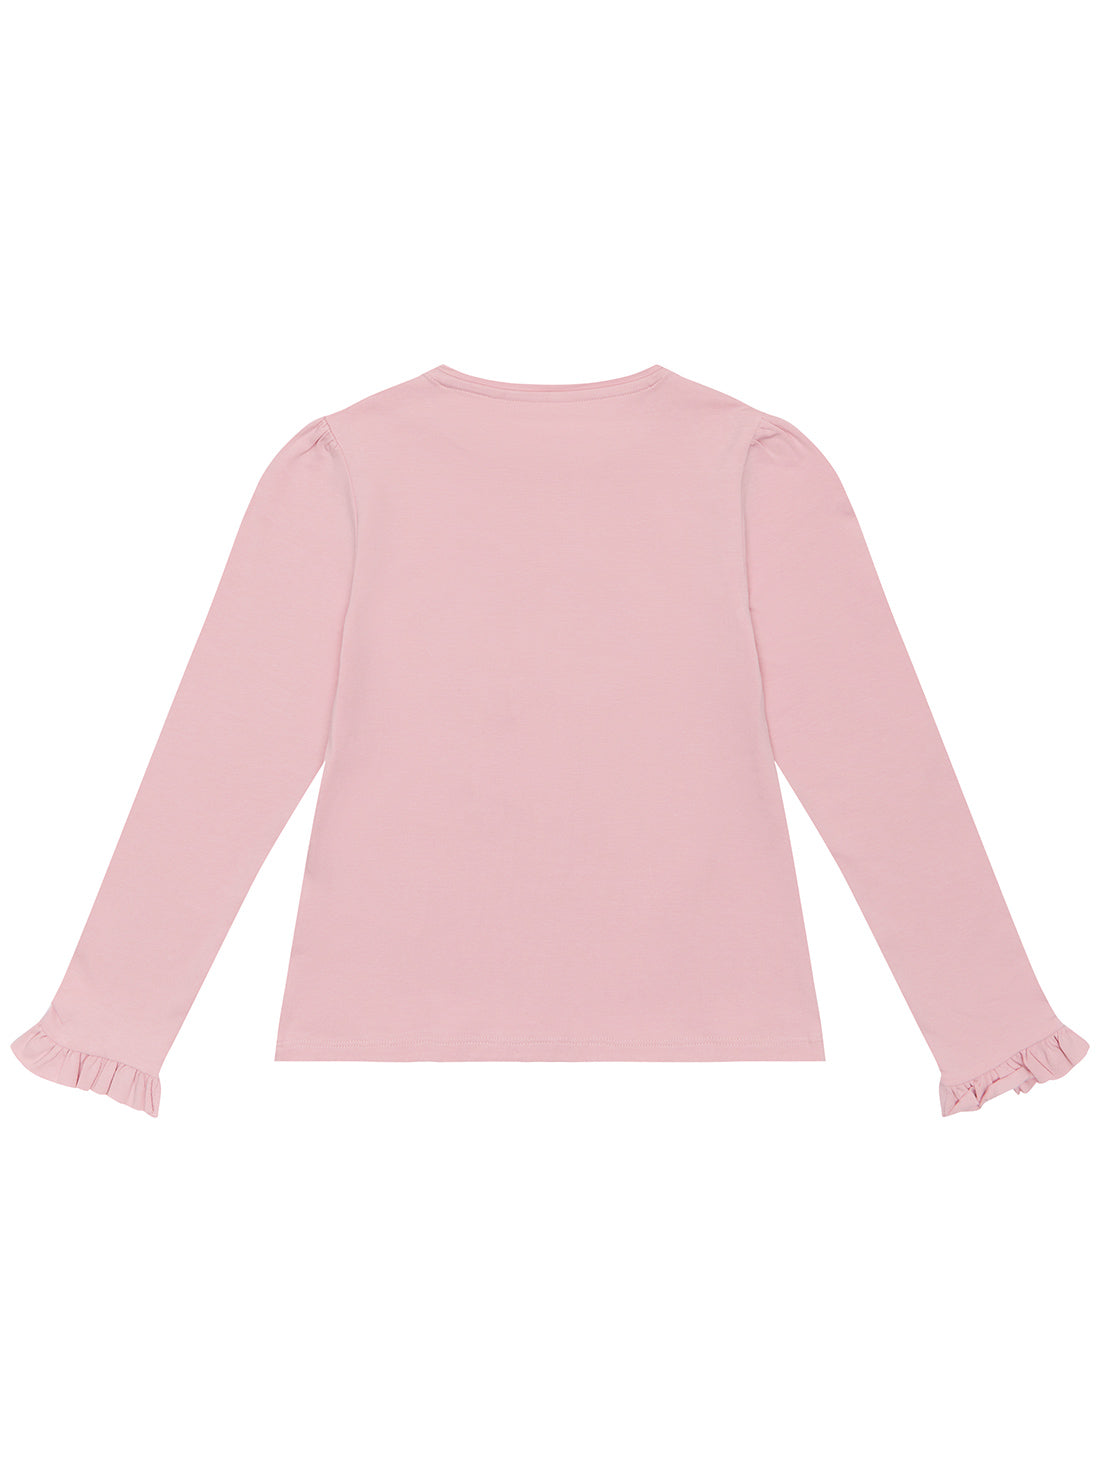 GUESS Pink Long Sleeve T-Shirt (2-7) back view